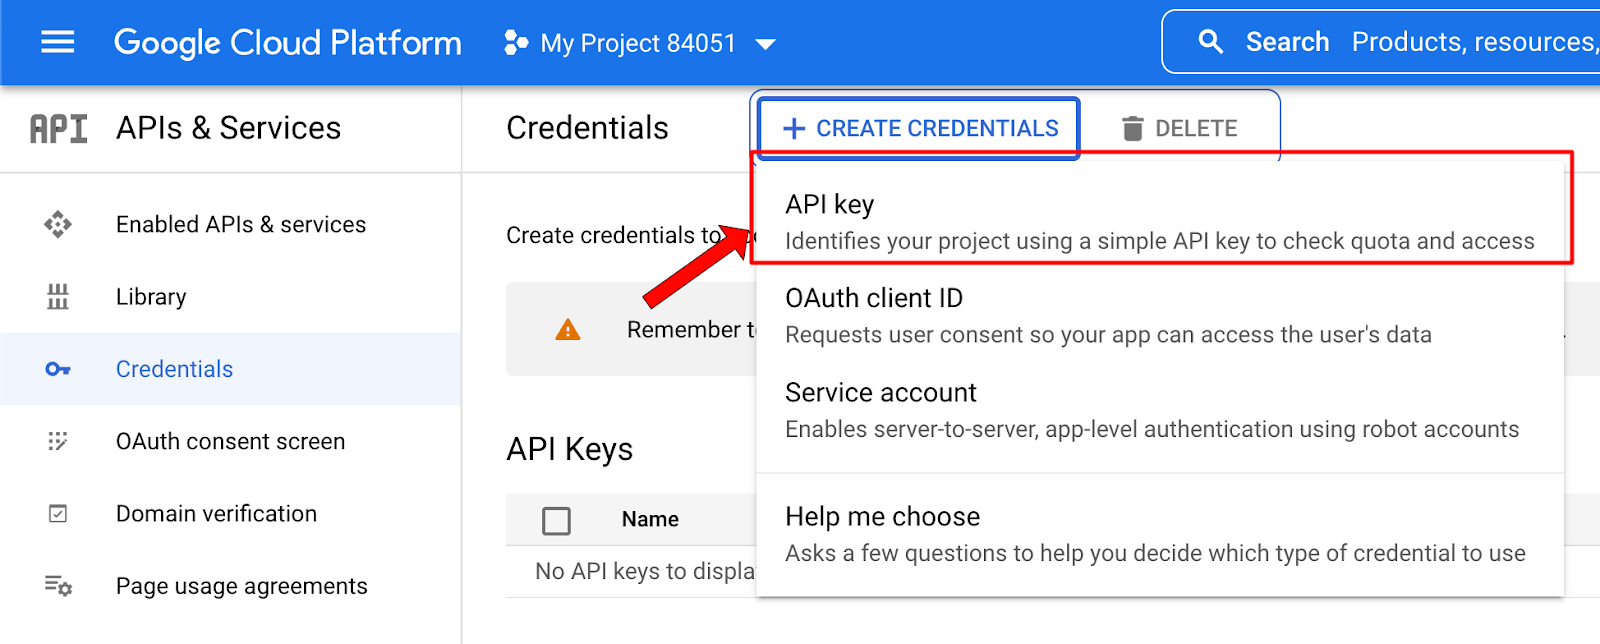 GCP Credentials page where the user clicks on the "CREATE CREDENTIALS" button and then on the "API key" menu item.